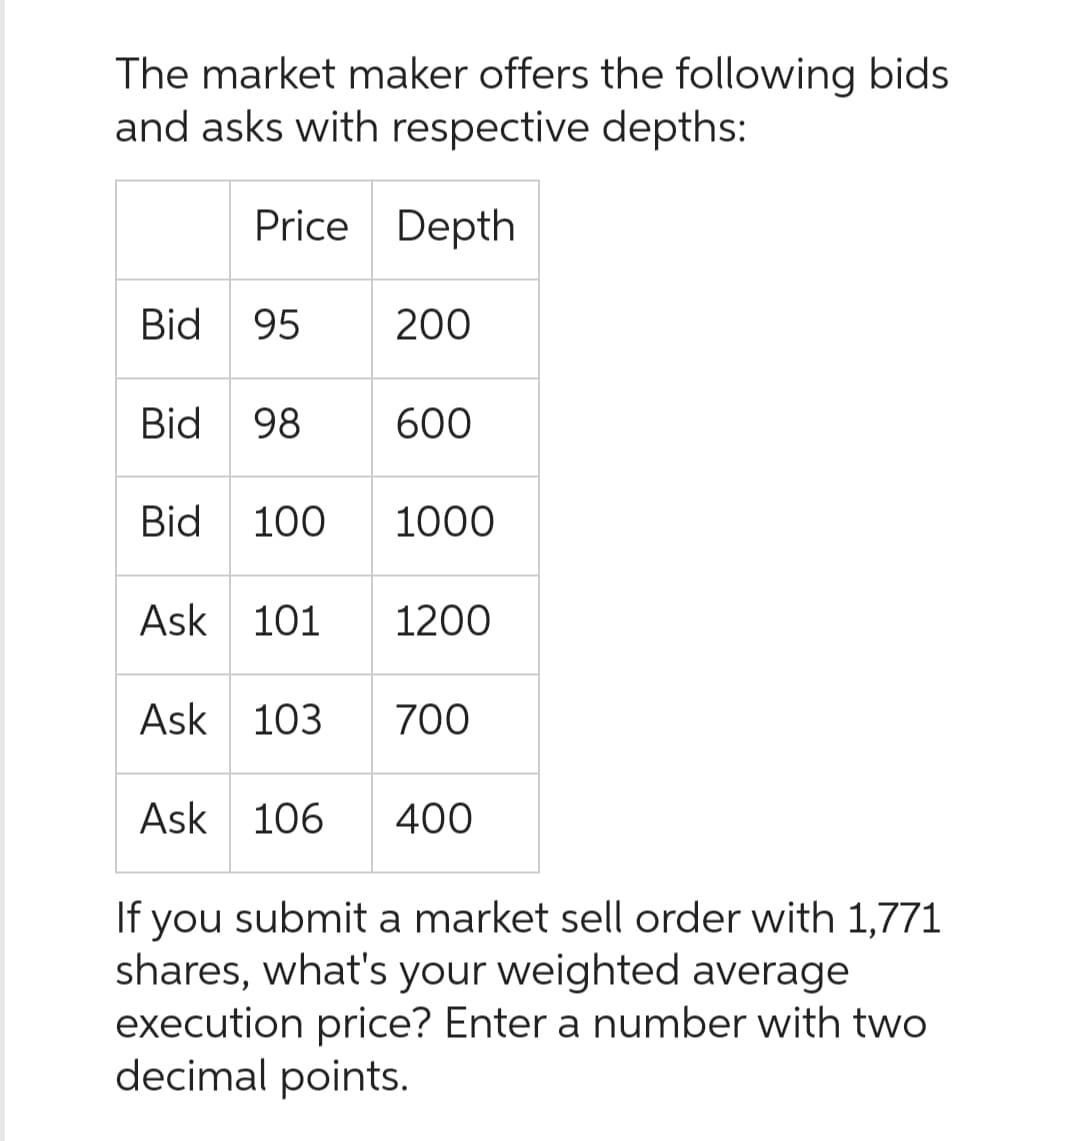 The market maker offers the following bids
and asks with respective depths:
Price Depth
Bid 95
Bid 98 600
Bid 100
Ask 101
200
Ask 103
1000
1200
700
Ask 106 400
If you submit a market sell order with 1,771
shares, what's your weighted average
execution price? Enter a number with two
decimal points.